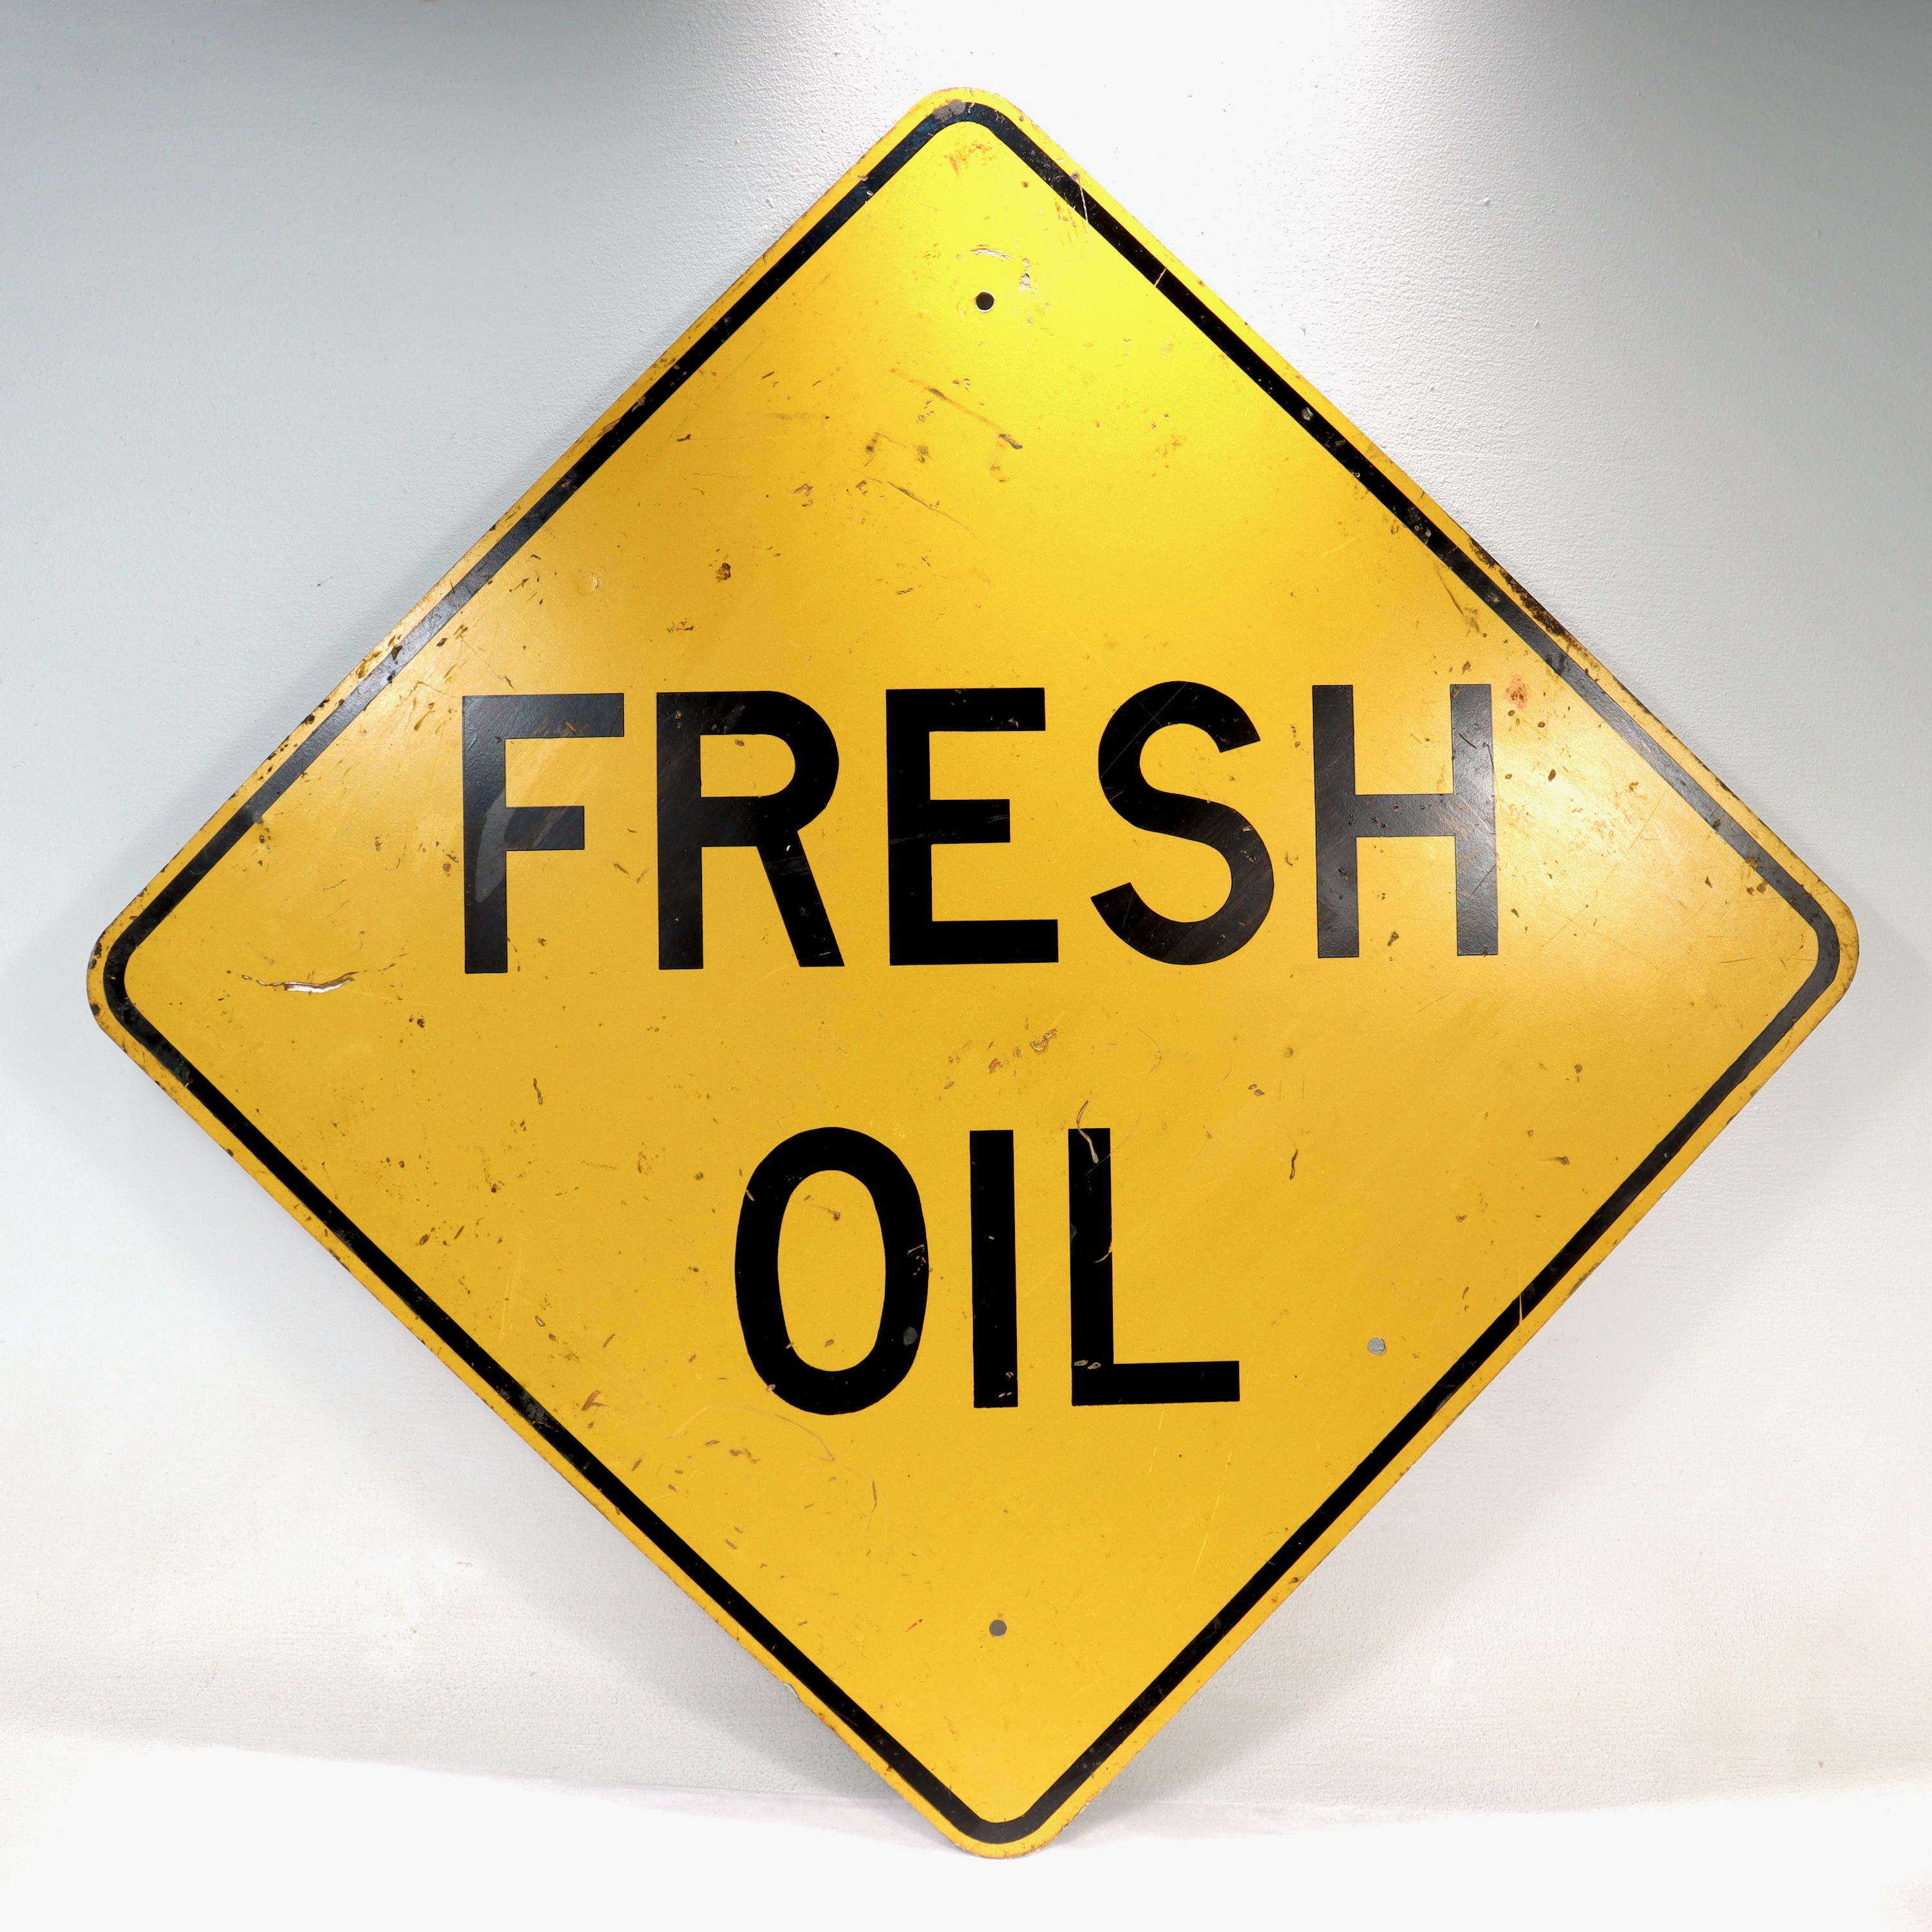 A fine vintage traffic or street sign.

With text that reads: FRESH OIL.

In reflective yellow paint.

Simply a great vintage sign! 

Date:
Mid to Late 20th Century

Overall Condition:
It is in overall good, as-pictured, used estate